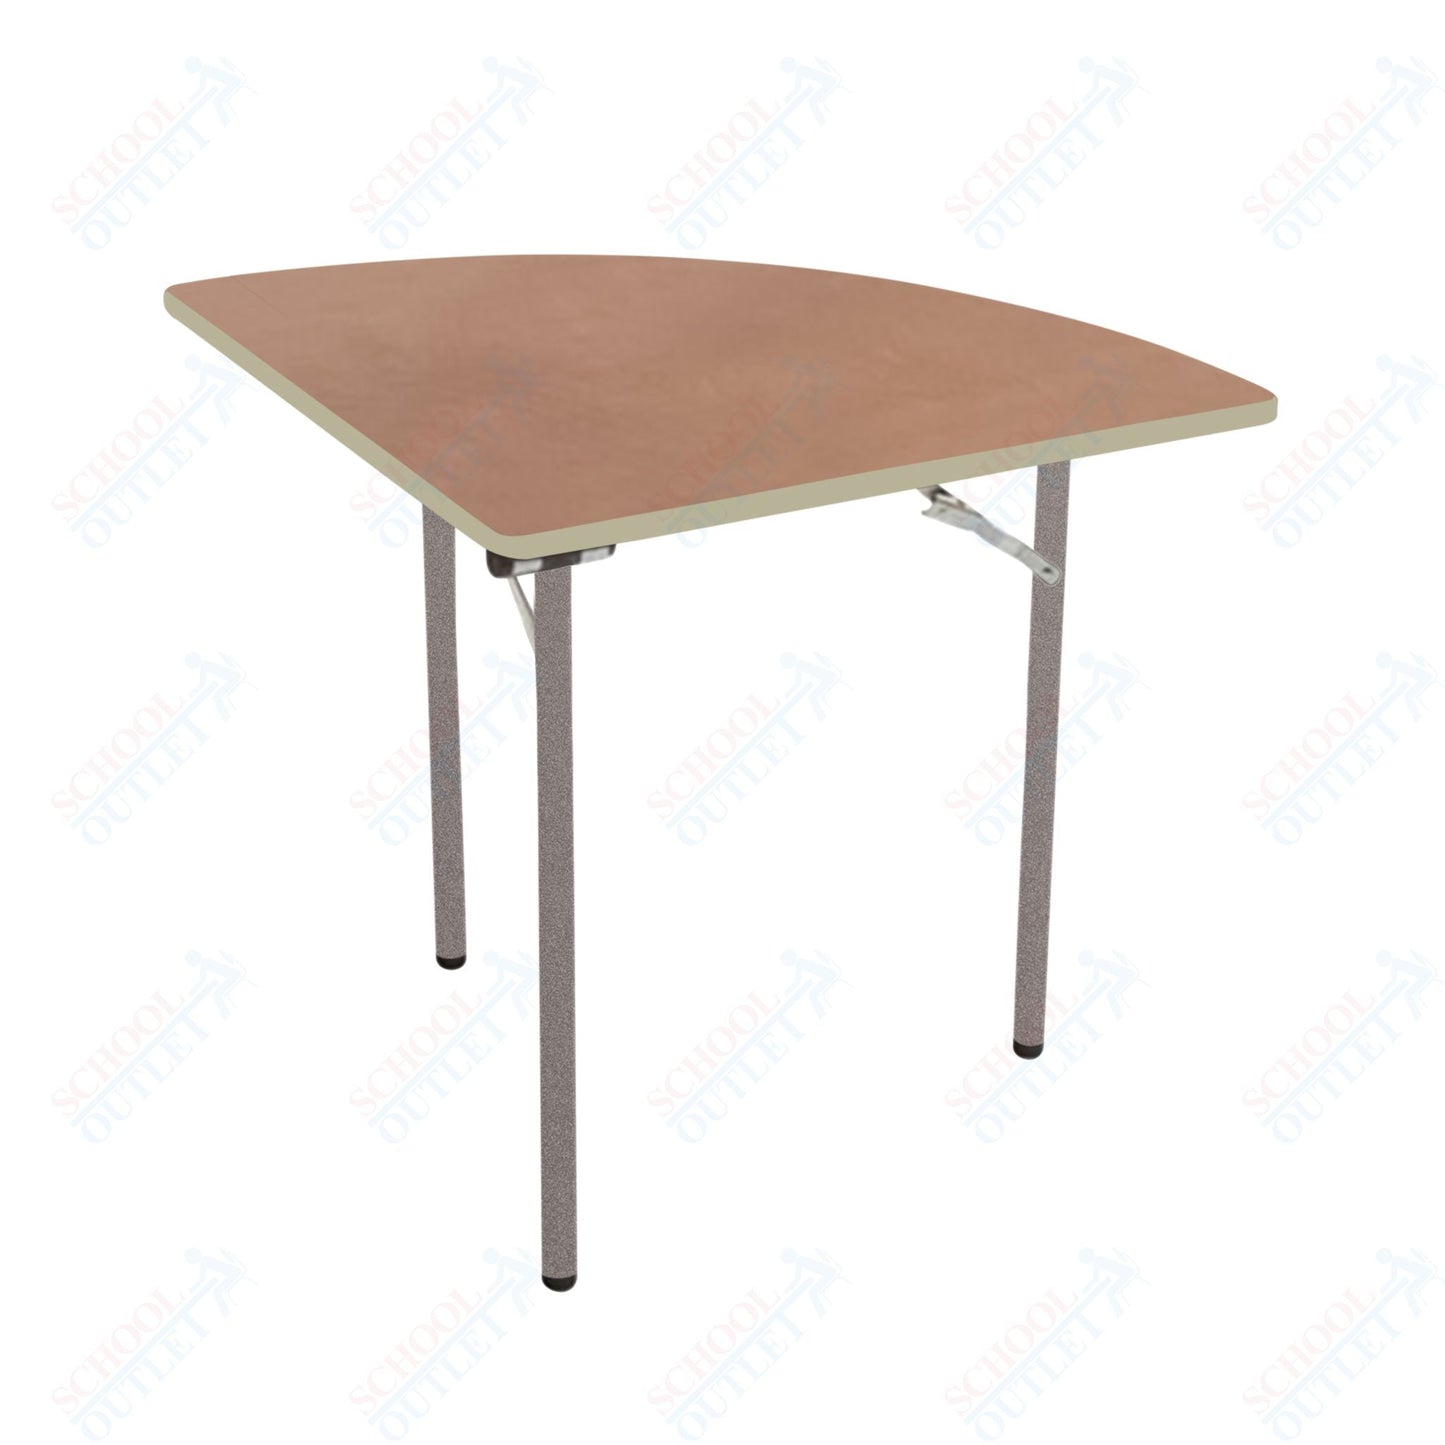 AmTab Folding Table - Plywood Stained and Sealed - Vinyl T - Molding Edge - Quarter Round - Quarter 72" Diameter x 29"H (AmTab AMT - QR72PM) - SchoolOutlet